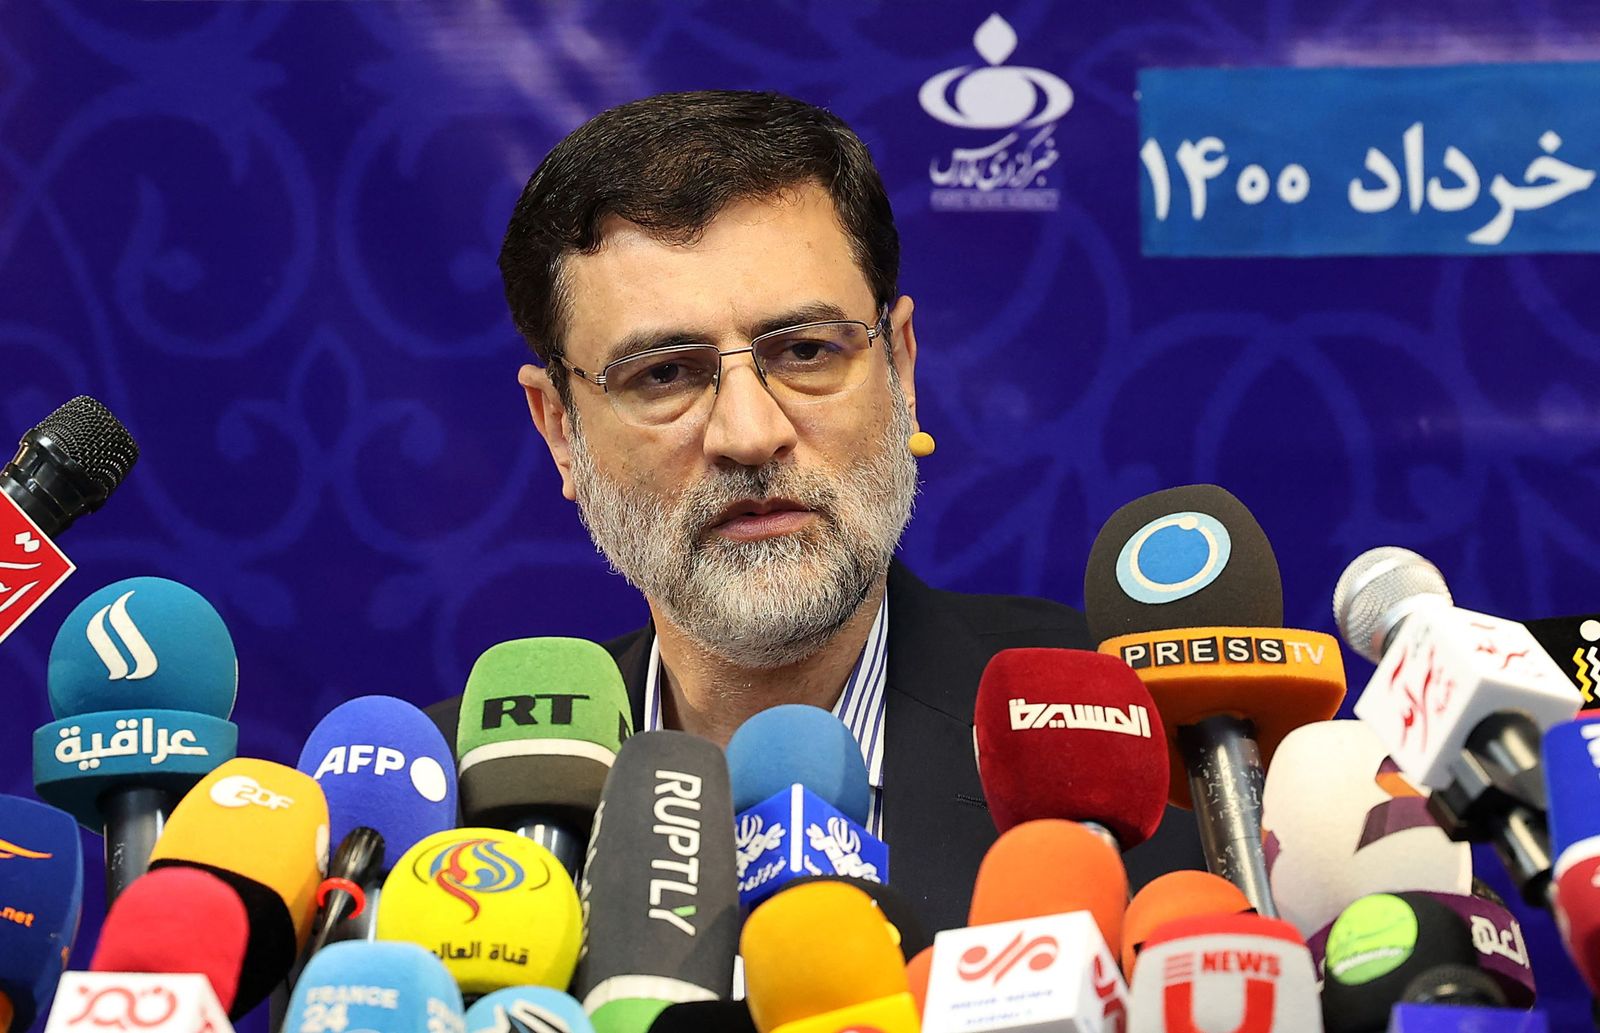 Iranian presidential candidate Amirhossein Ghazizadeh-Hashemi gives a press conference at the Fars News Agency in Tehran, on May 26, 2021. - Iran approved seven hopefuls to run in next month's presidential poll, with judiciary chief Ebrahim Raisi among the mainly ultraconservative candidates, while heavyweights Mahmoud Ahmadinejad and Ali Larijani were barred. (Photo by ATTA KENARE / AFP) - AFP